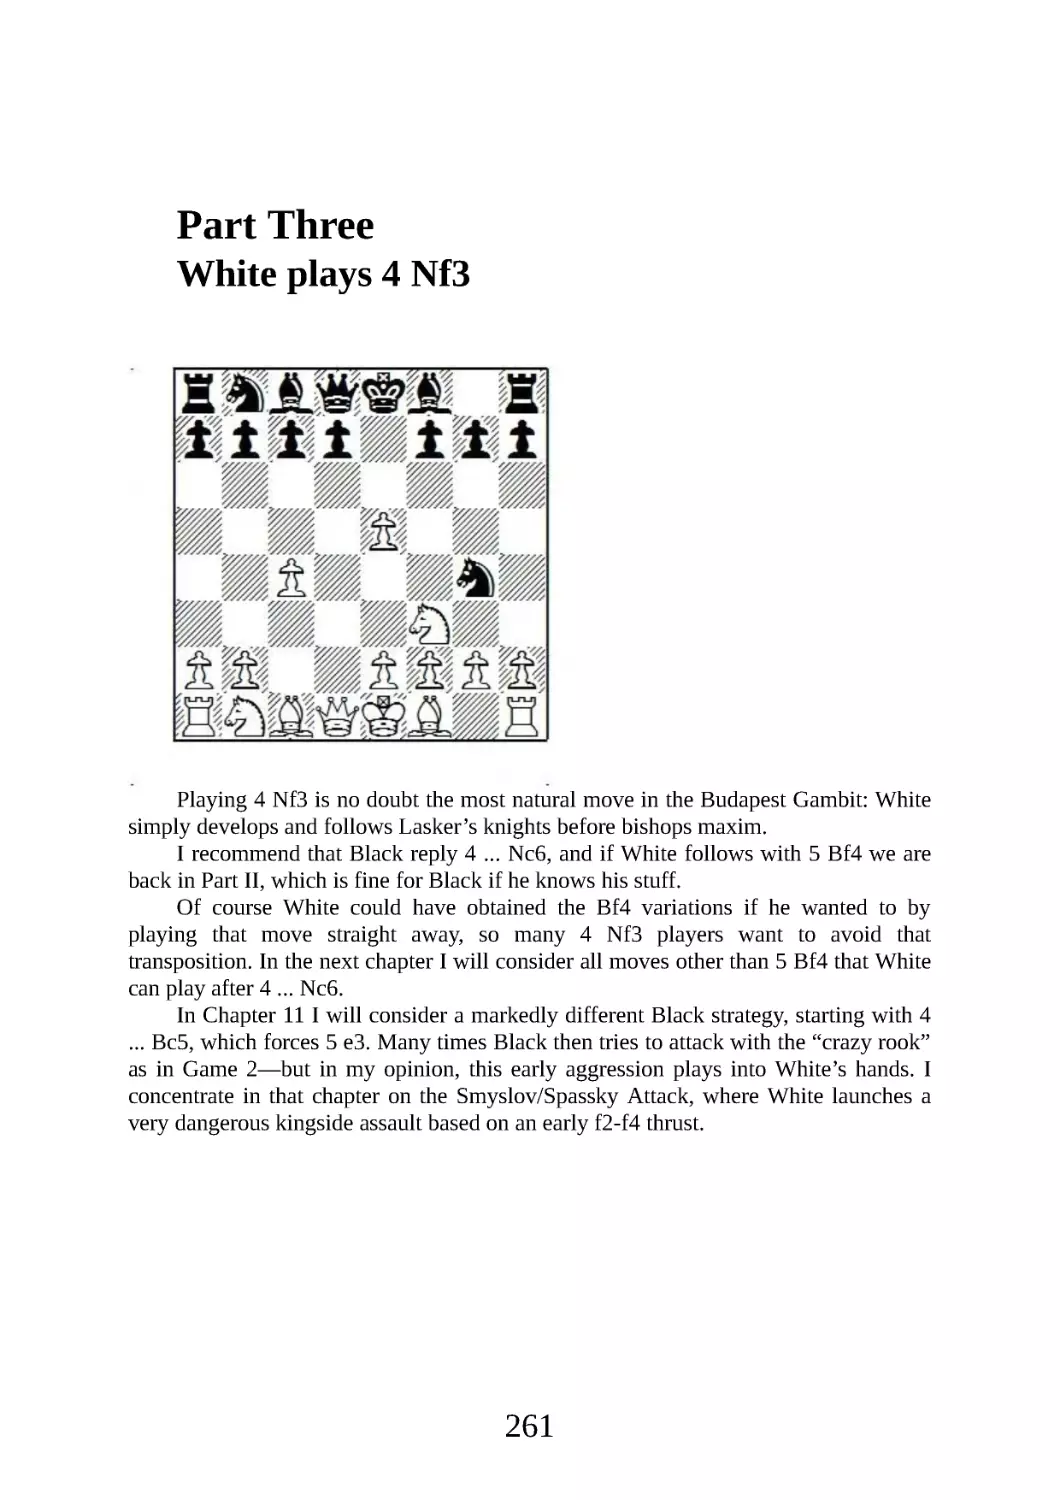 Part III: White plays 4 Nf3